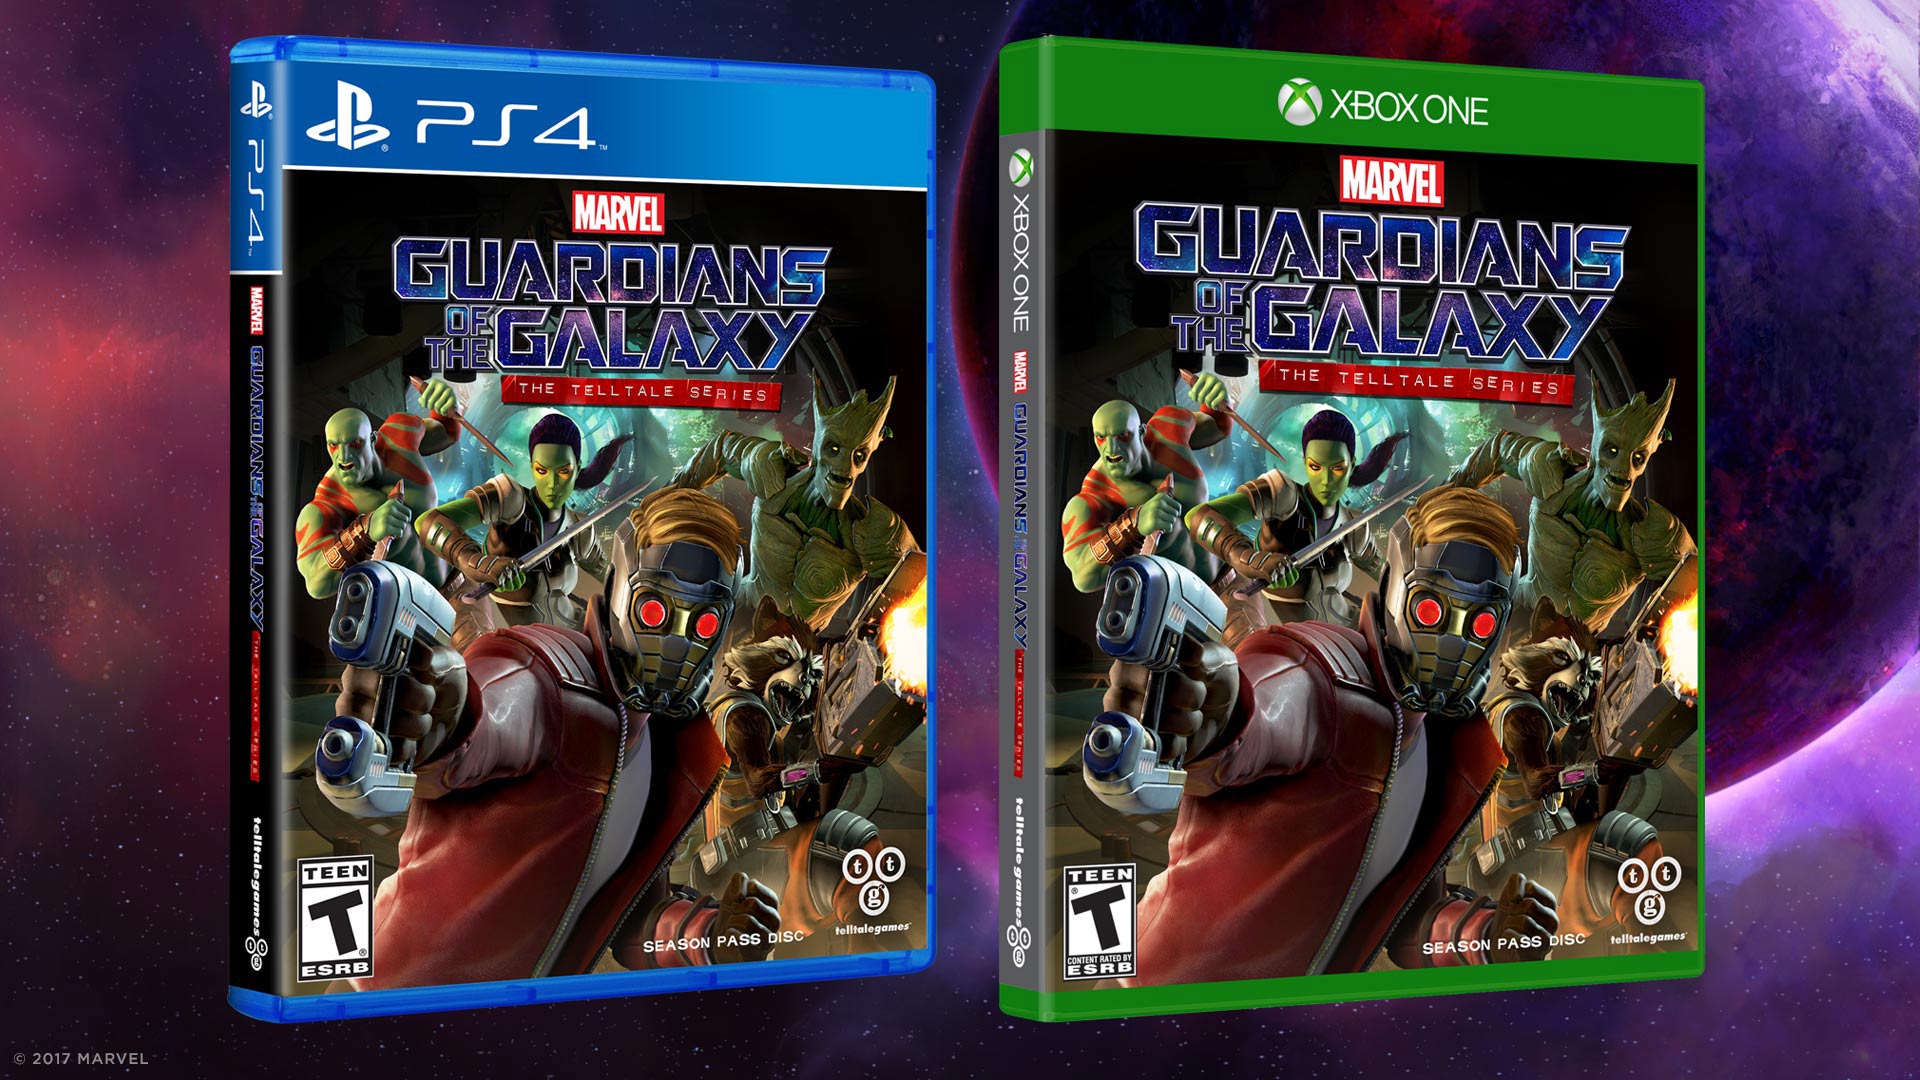 Telltale Guardians of the Galaxy series